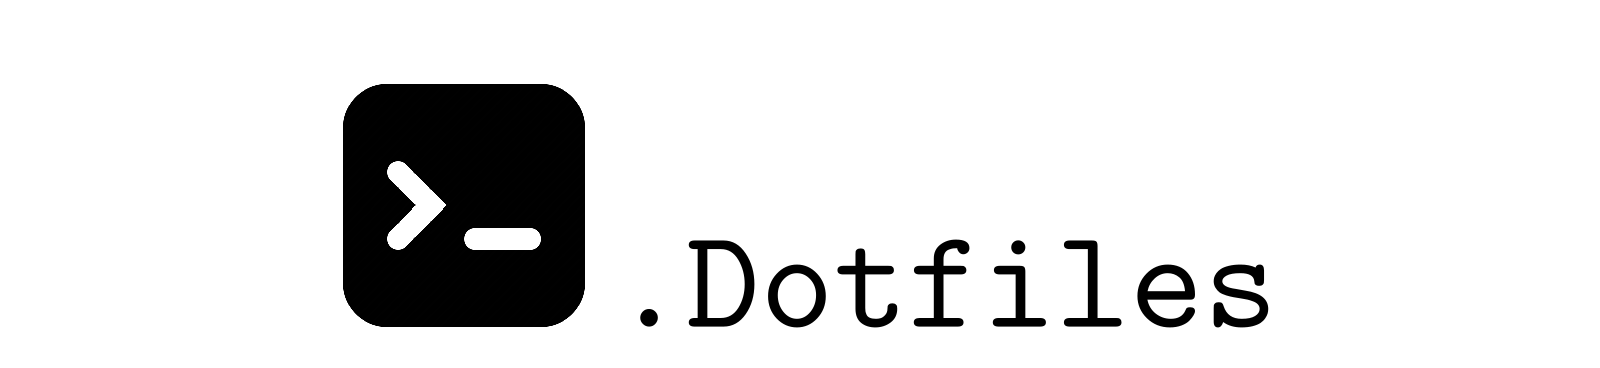 My Dotfiles Storage using Git and Shared Dotfile Repo